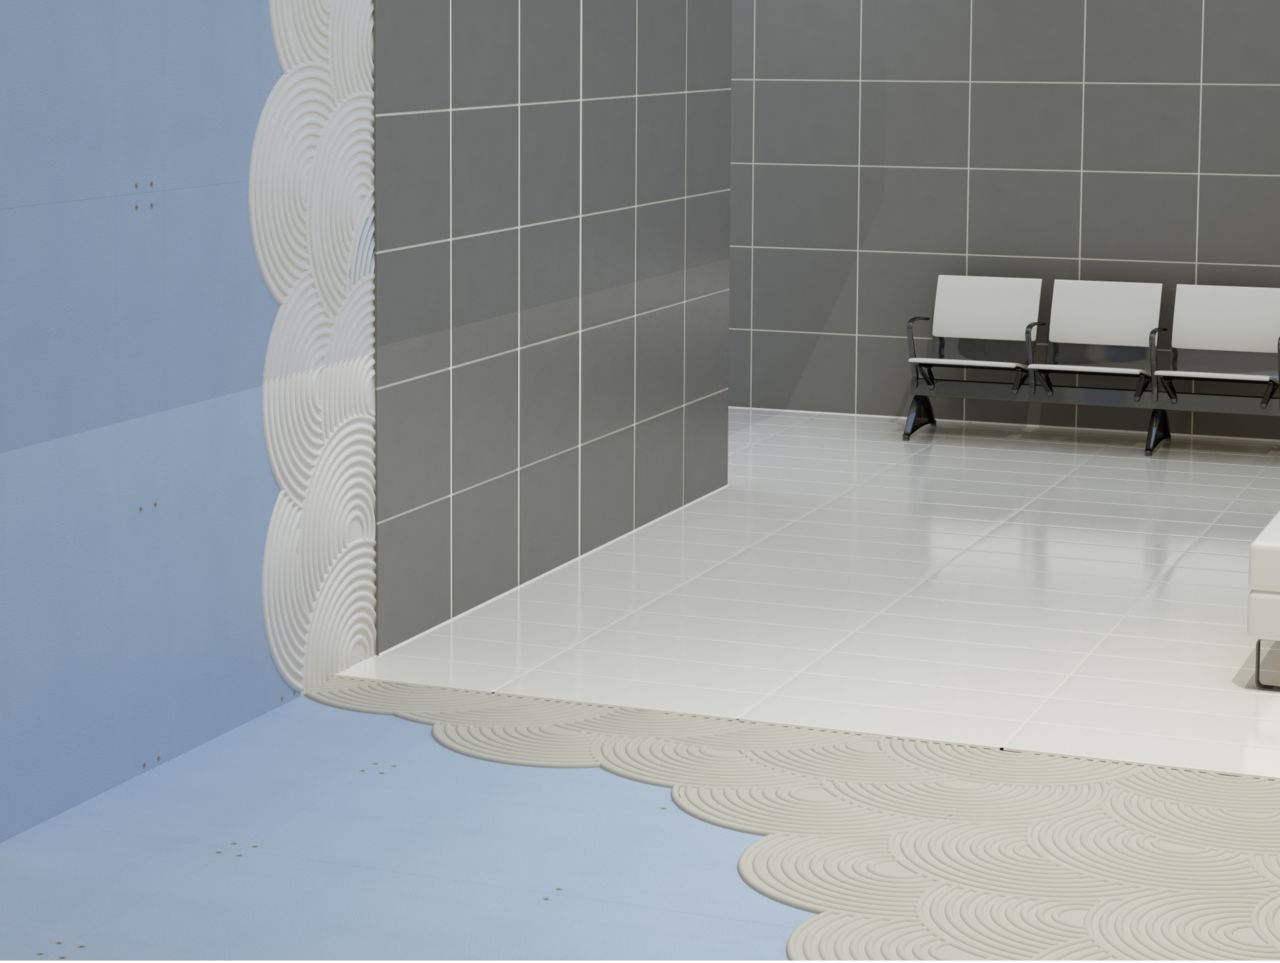 Illustration of tile setting adhesives and tiles on drywall in lobby with chairs